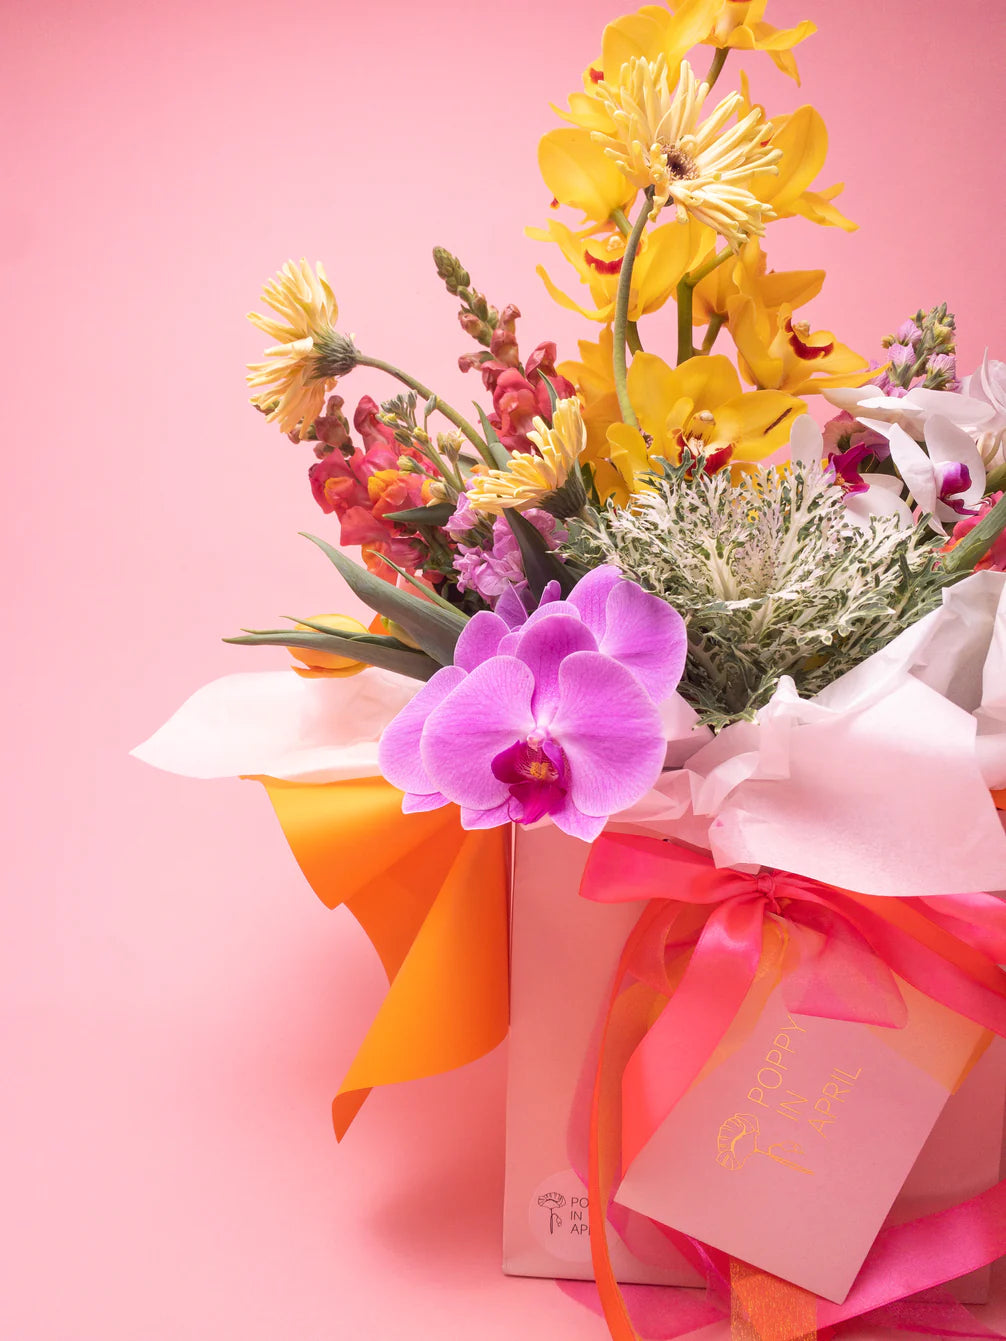 A vibrant bouquet of yellow and pink seasonal blooms with a prominent orchid, elegantly wrapped and adorned with a pink ribbon and a gift tag, set against a pink background. The Annie bouquet from Poppy in April.